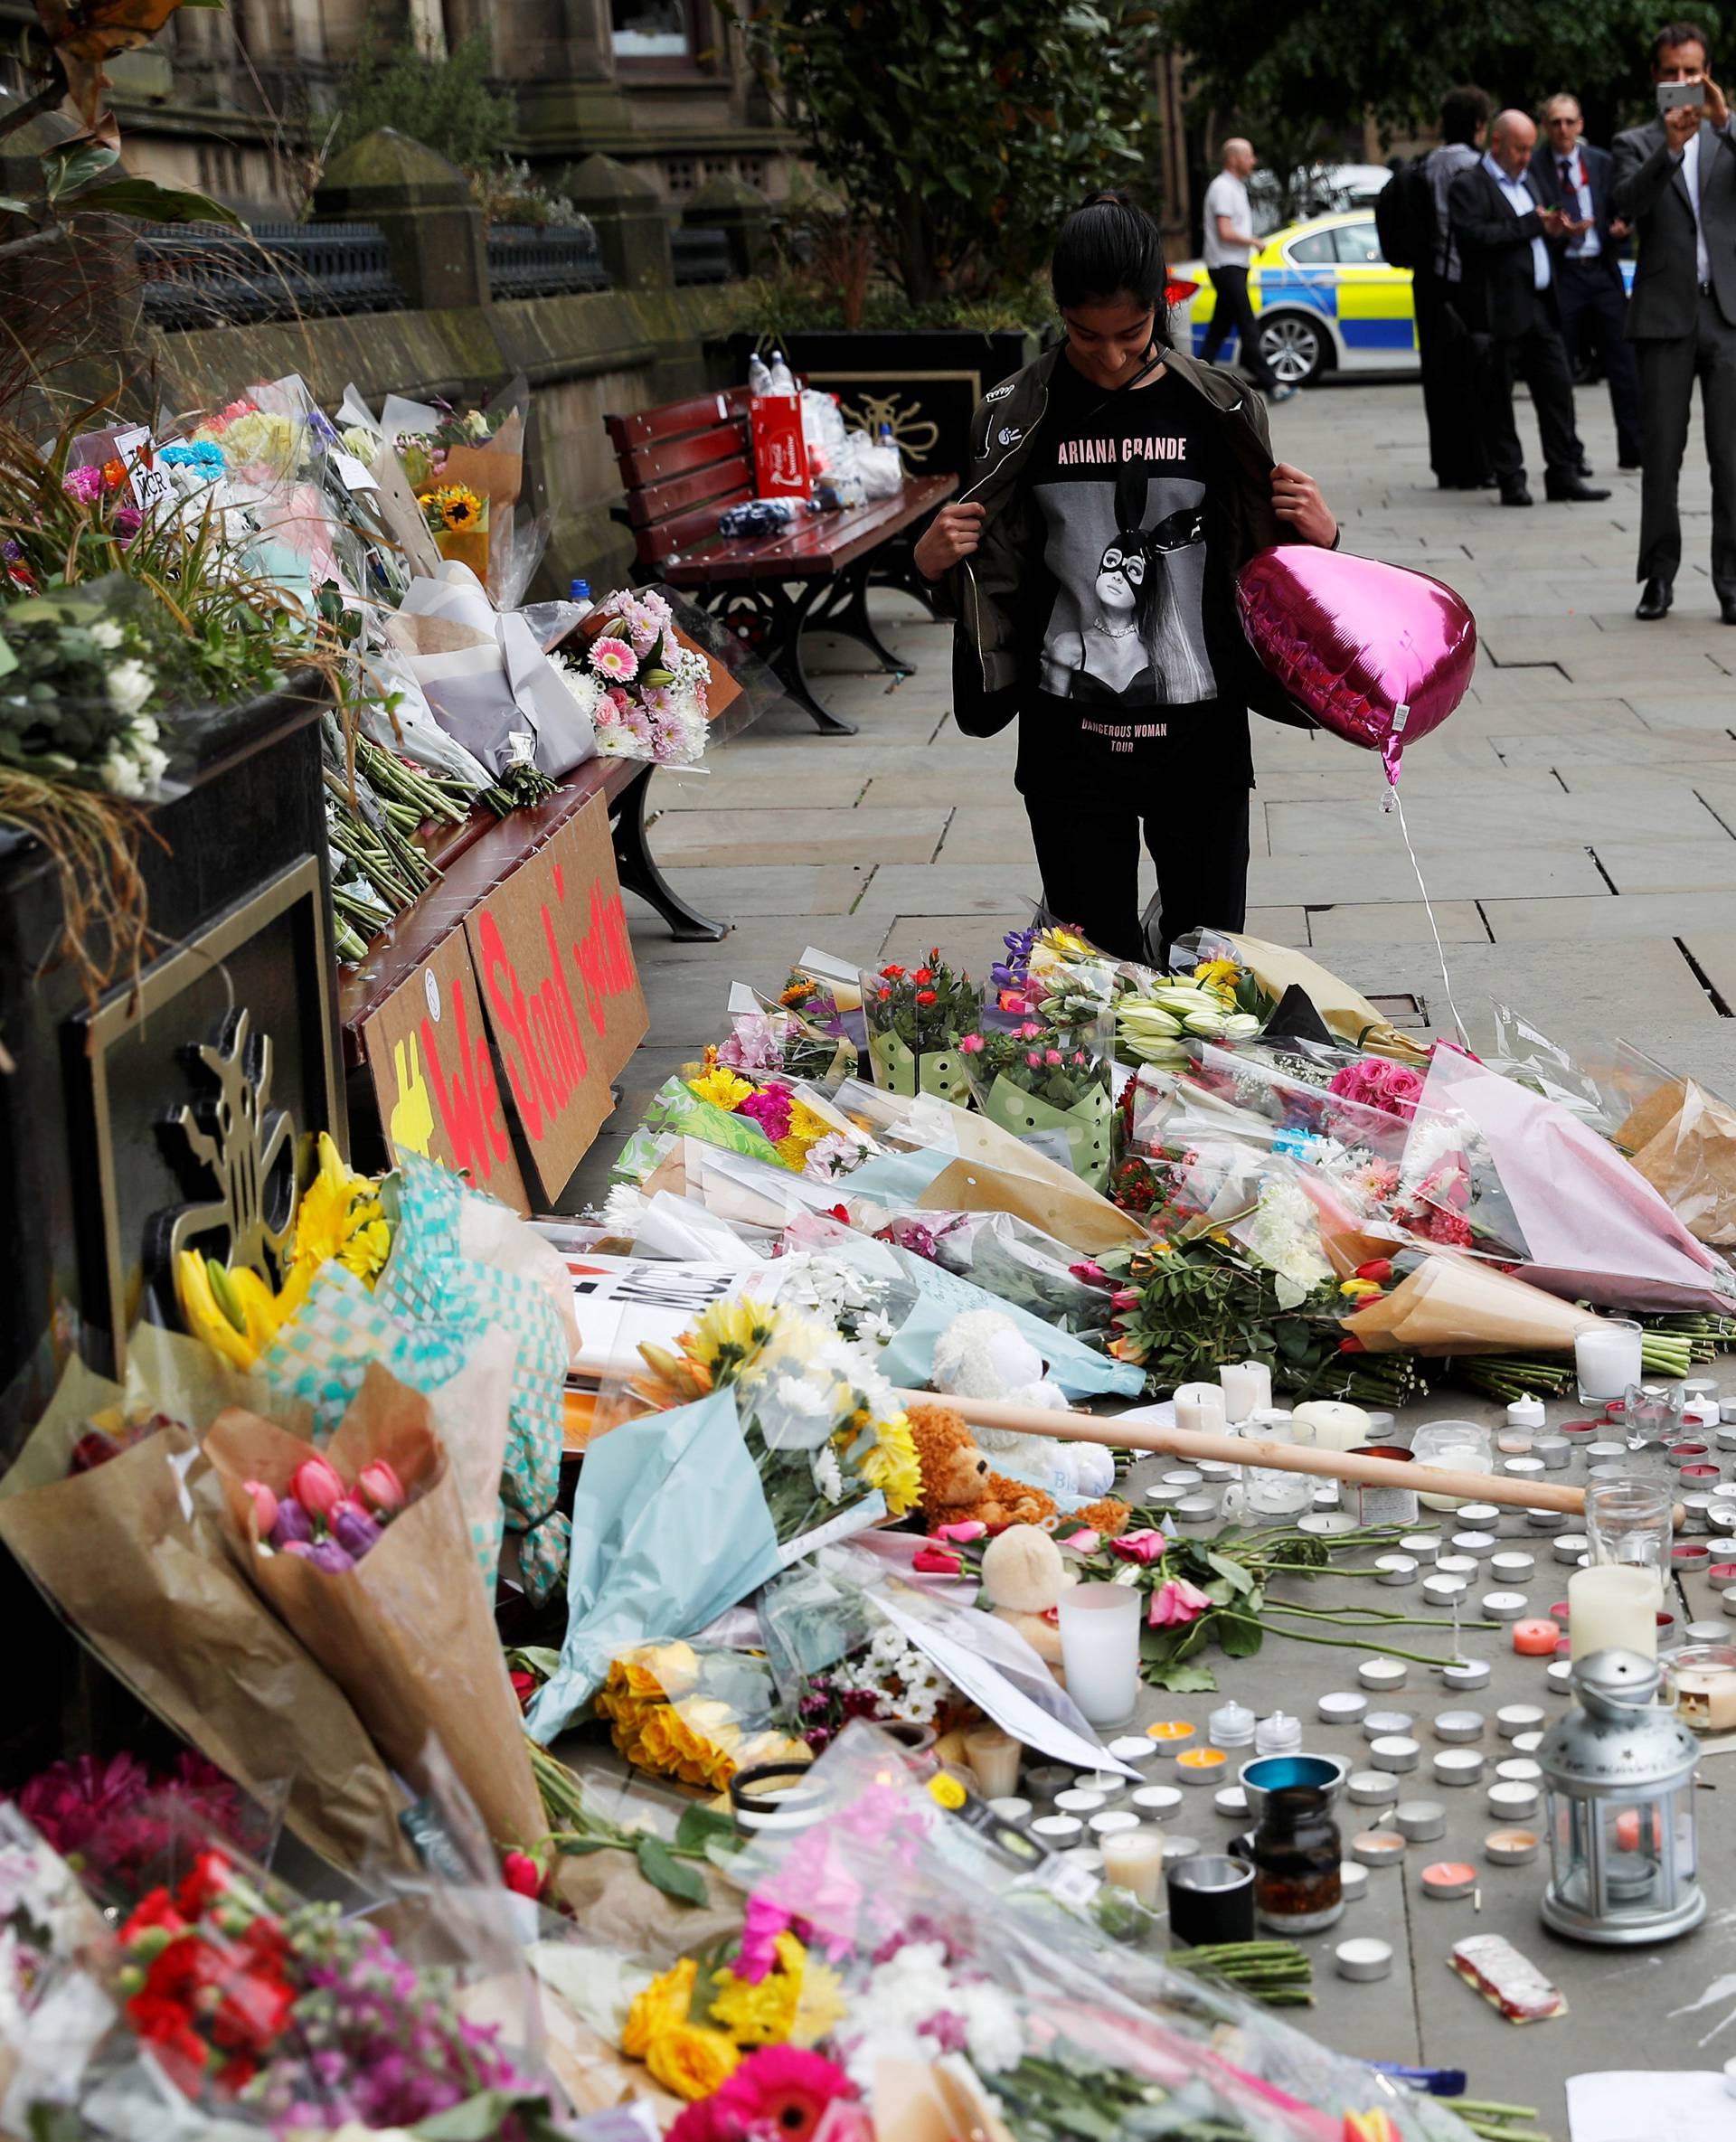 An Ariana Grande fan stands next to floral tributes left for the victims of an attack on concert goers at Manchester Arena, in St Ann's Square, in Manchester